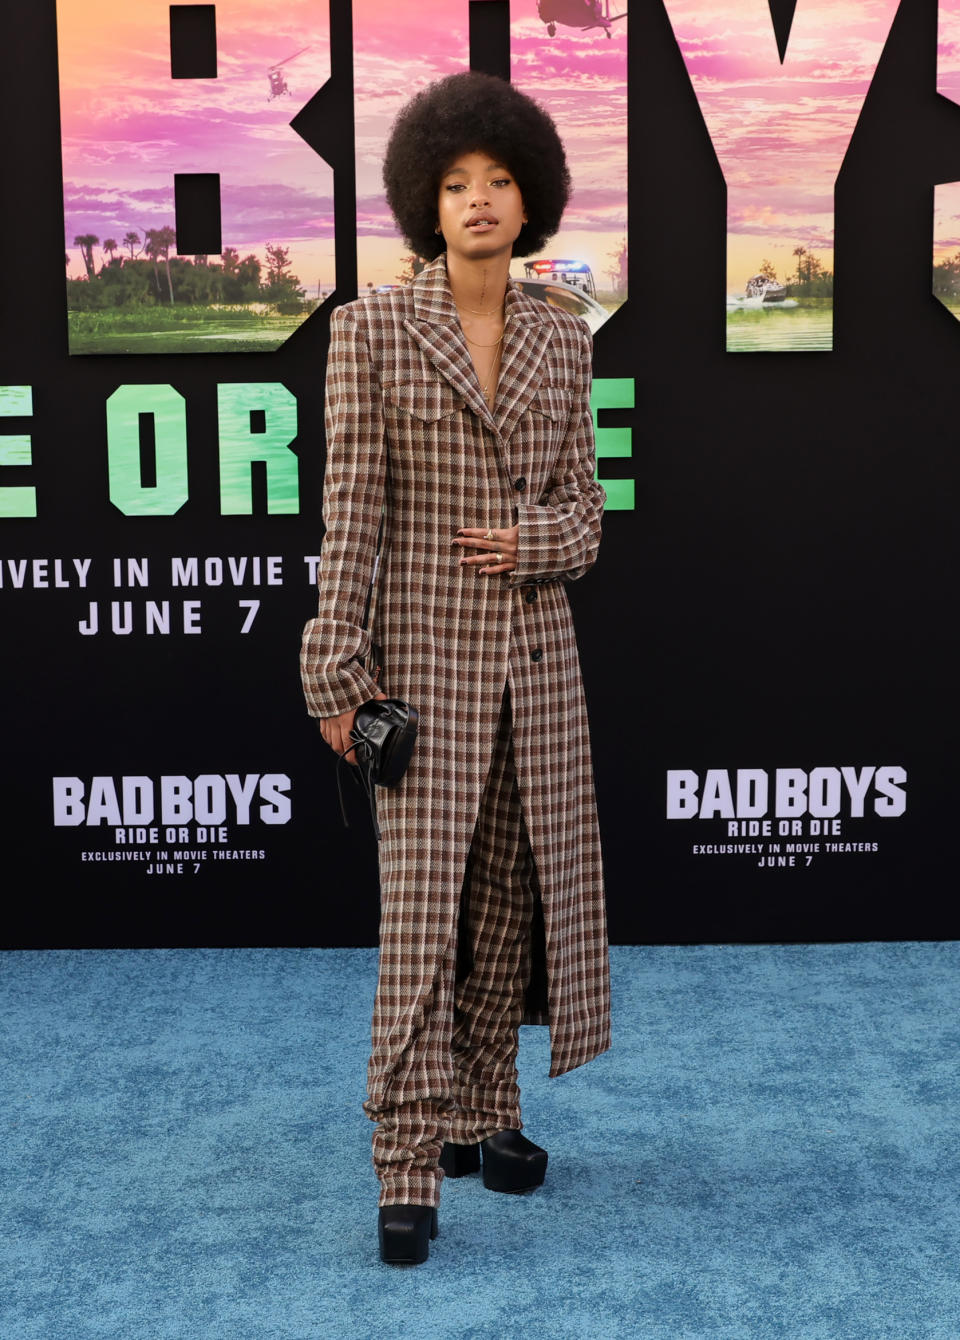 Willow Smith attends the Los Angeles premiere of Columbia Pictures' "Bad Boys: Ride or Die" wearing the Stylish Black Leather boots from Naked Wolfe